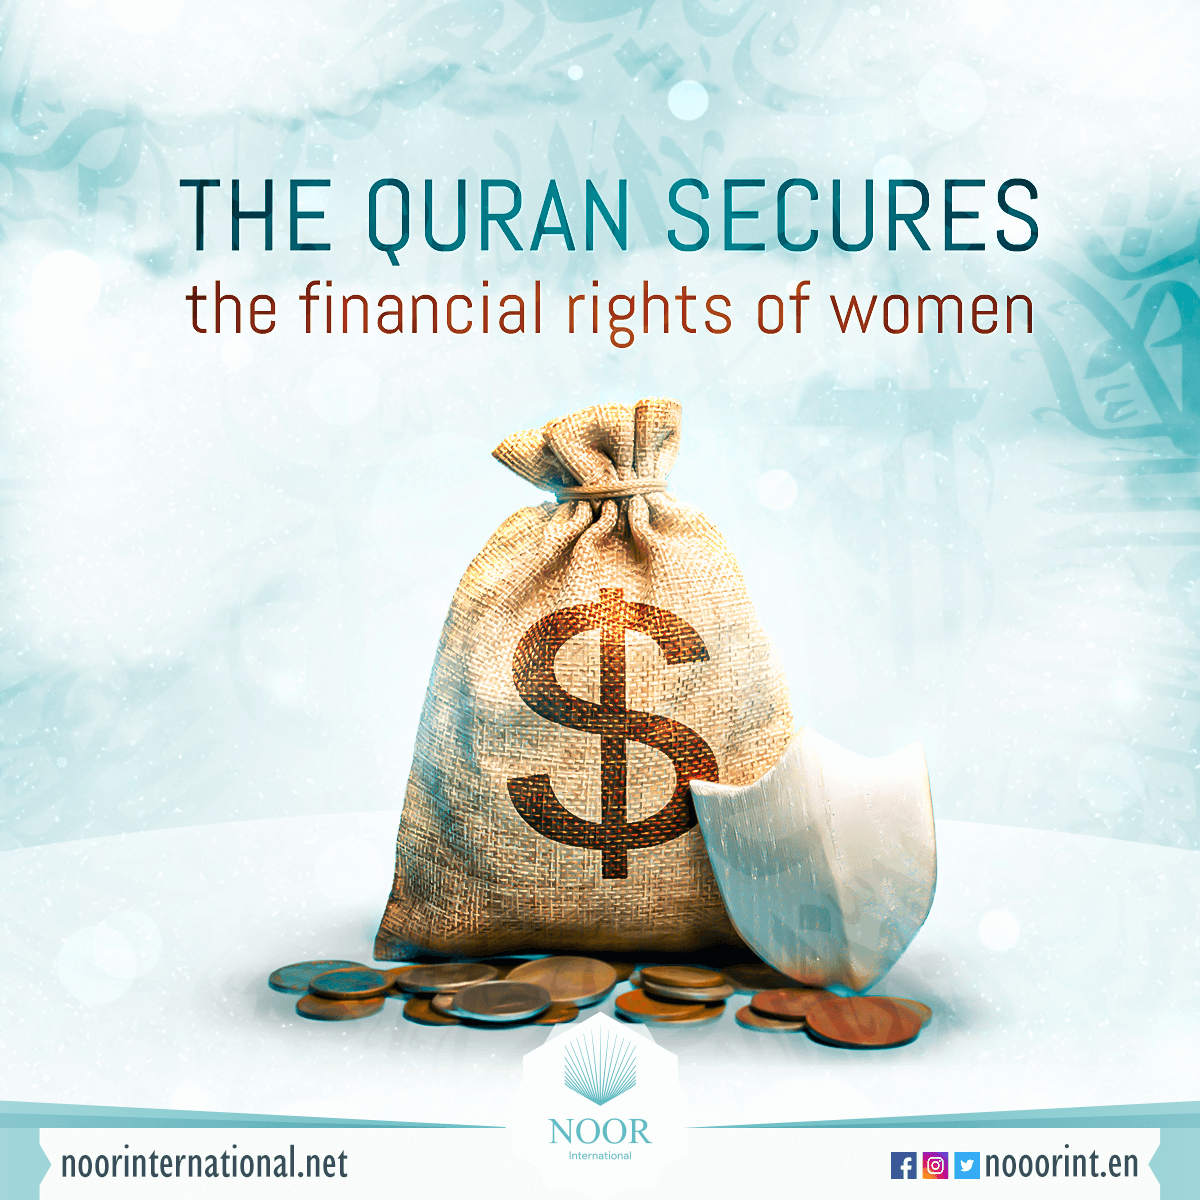 The Quran secures the financial rights of women